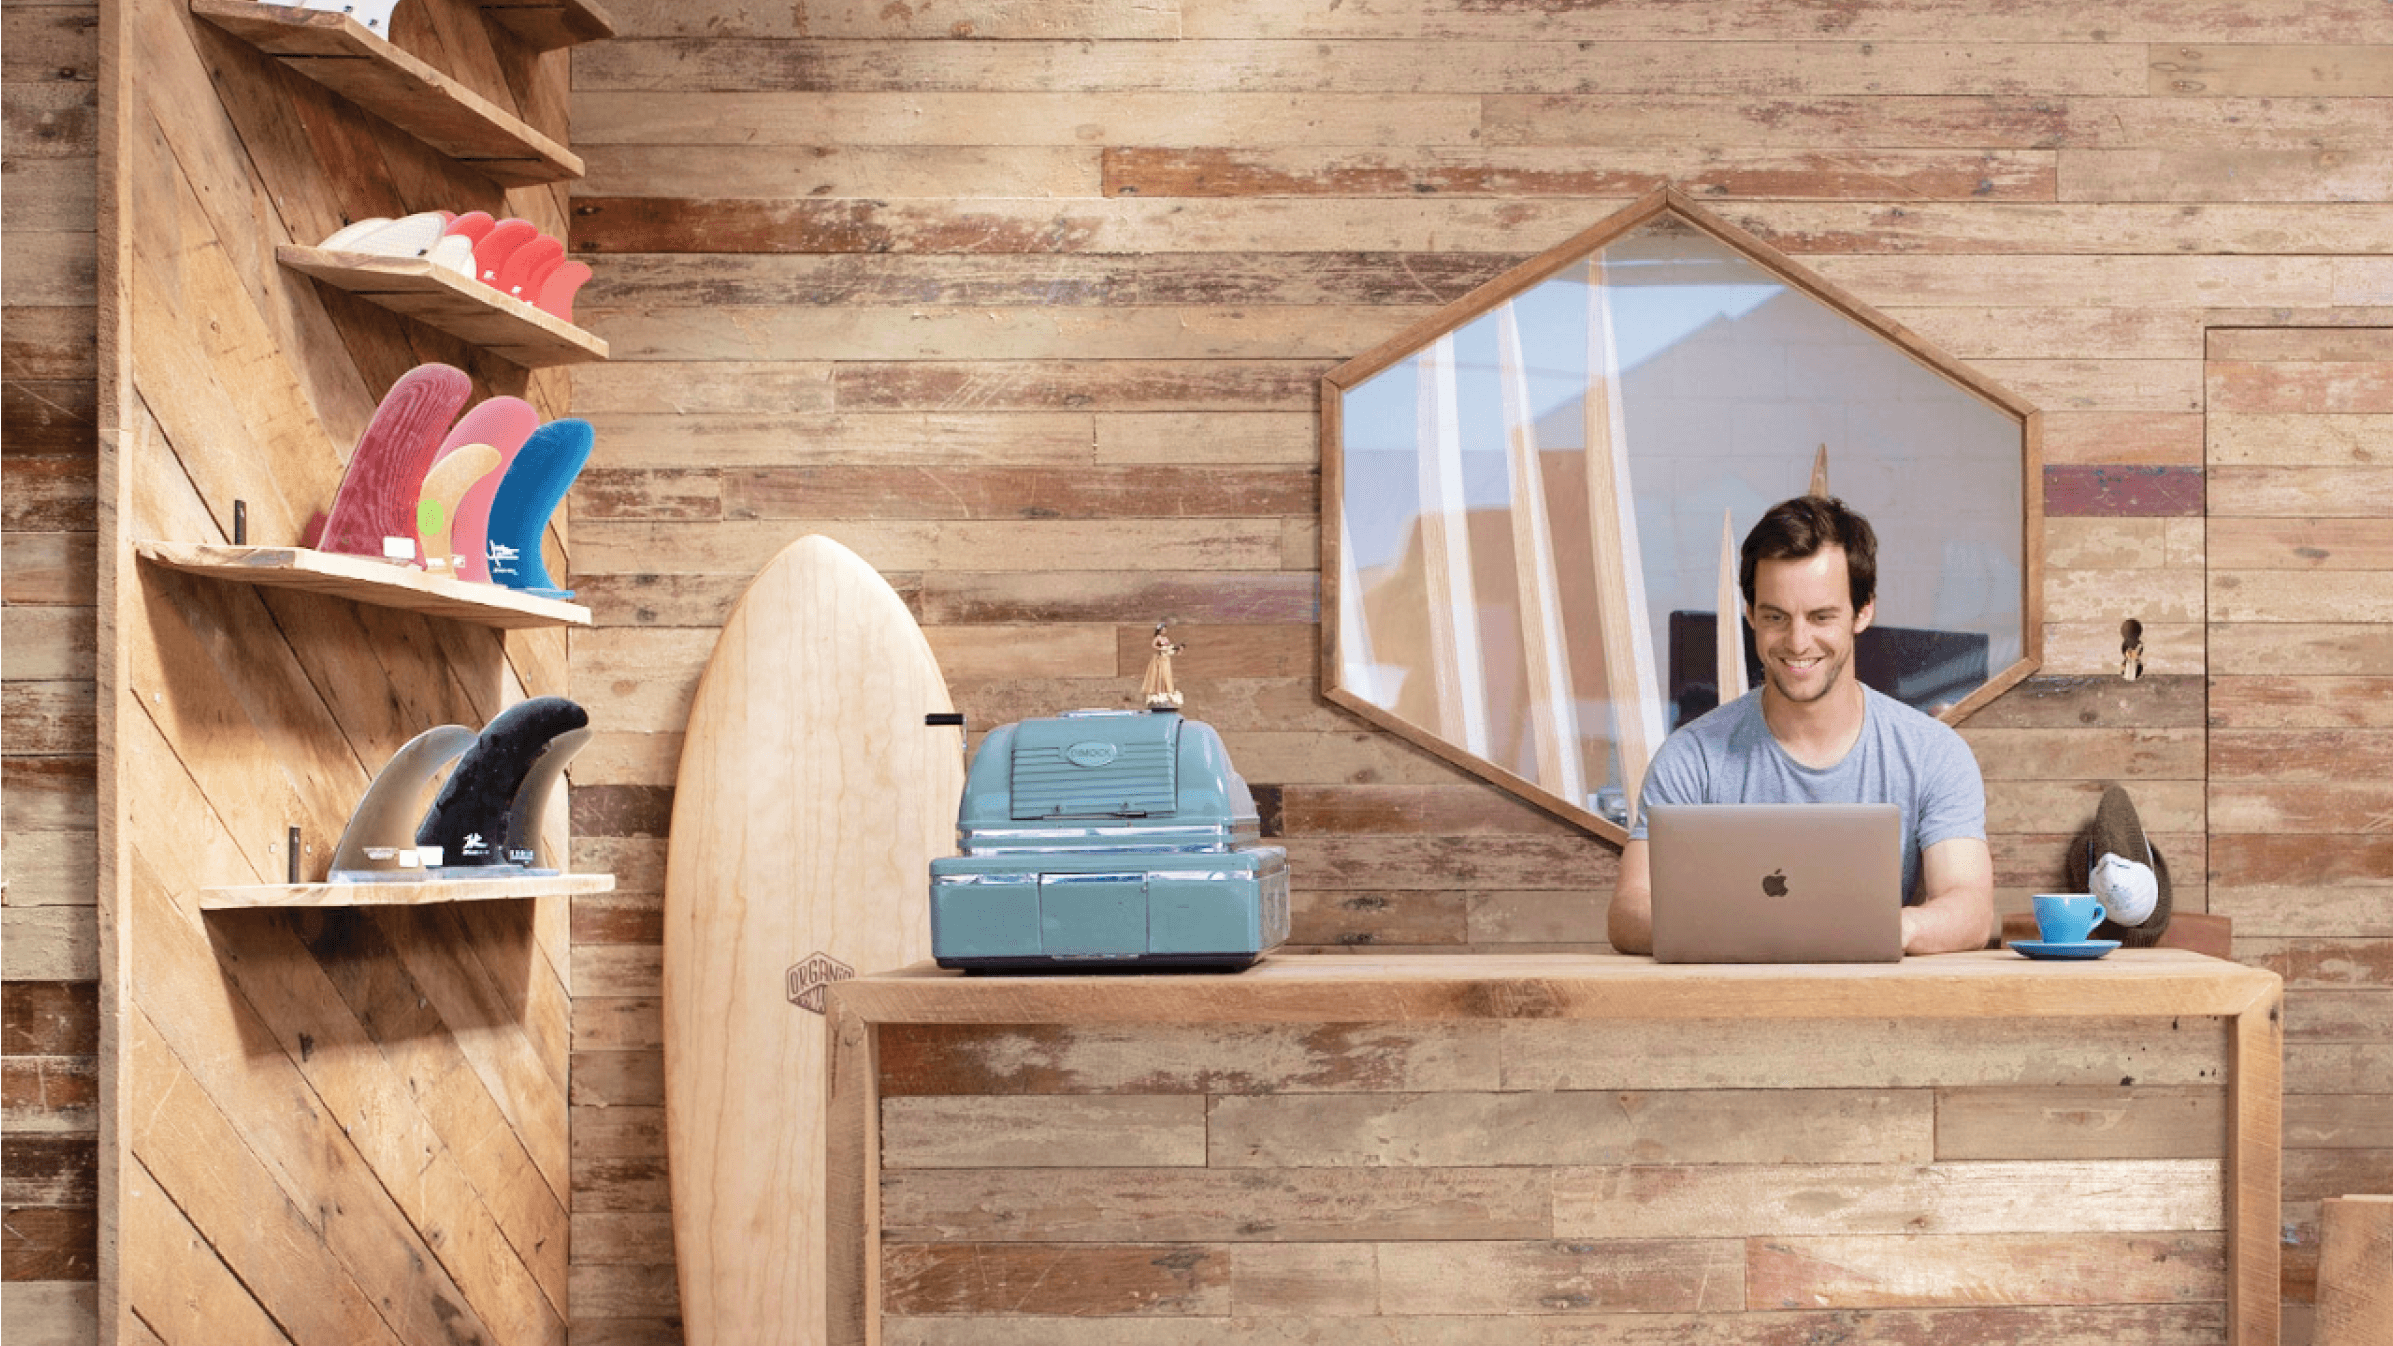 A surf shop owner reads about responsible data use for their business over a cup of coffee.